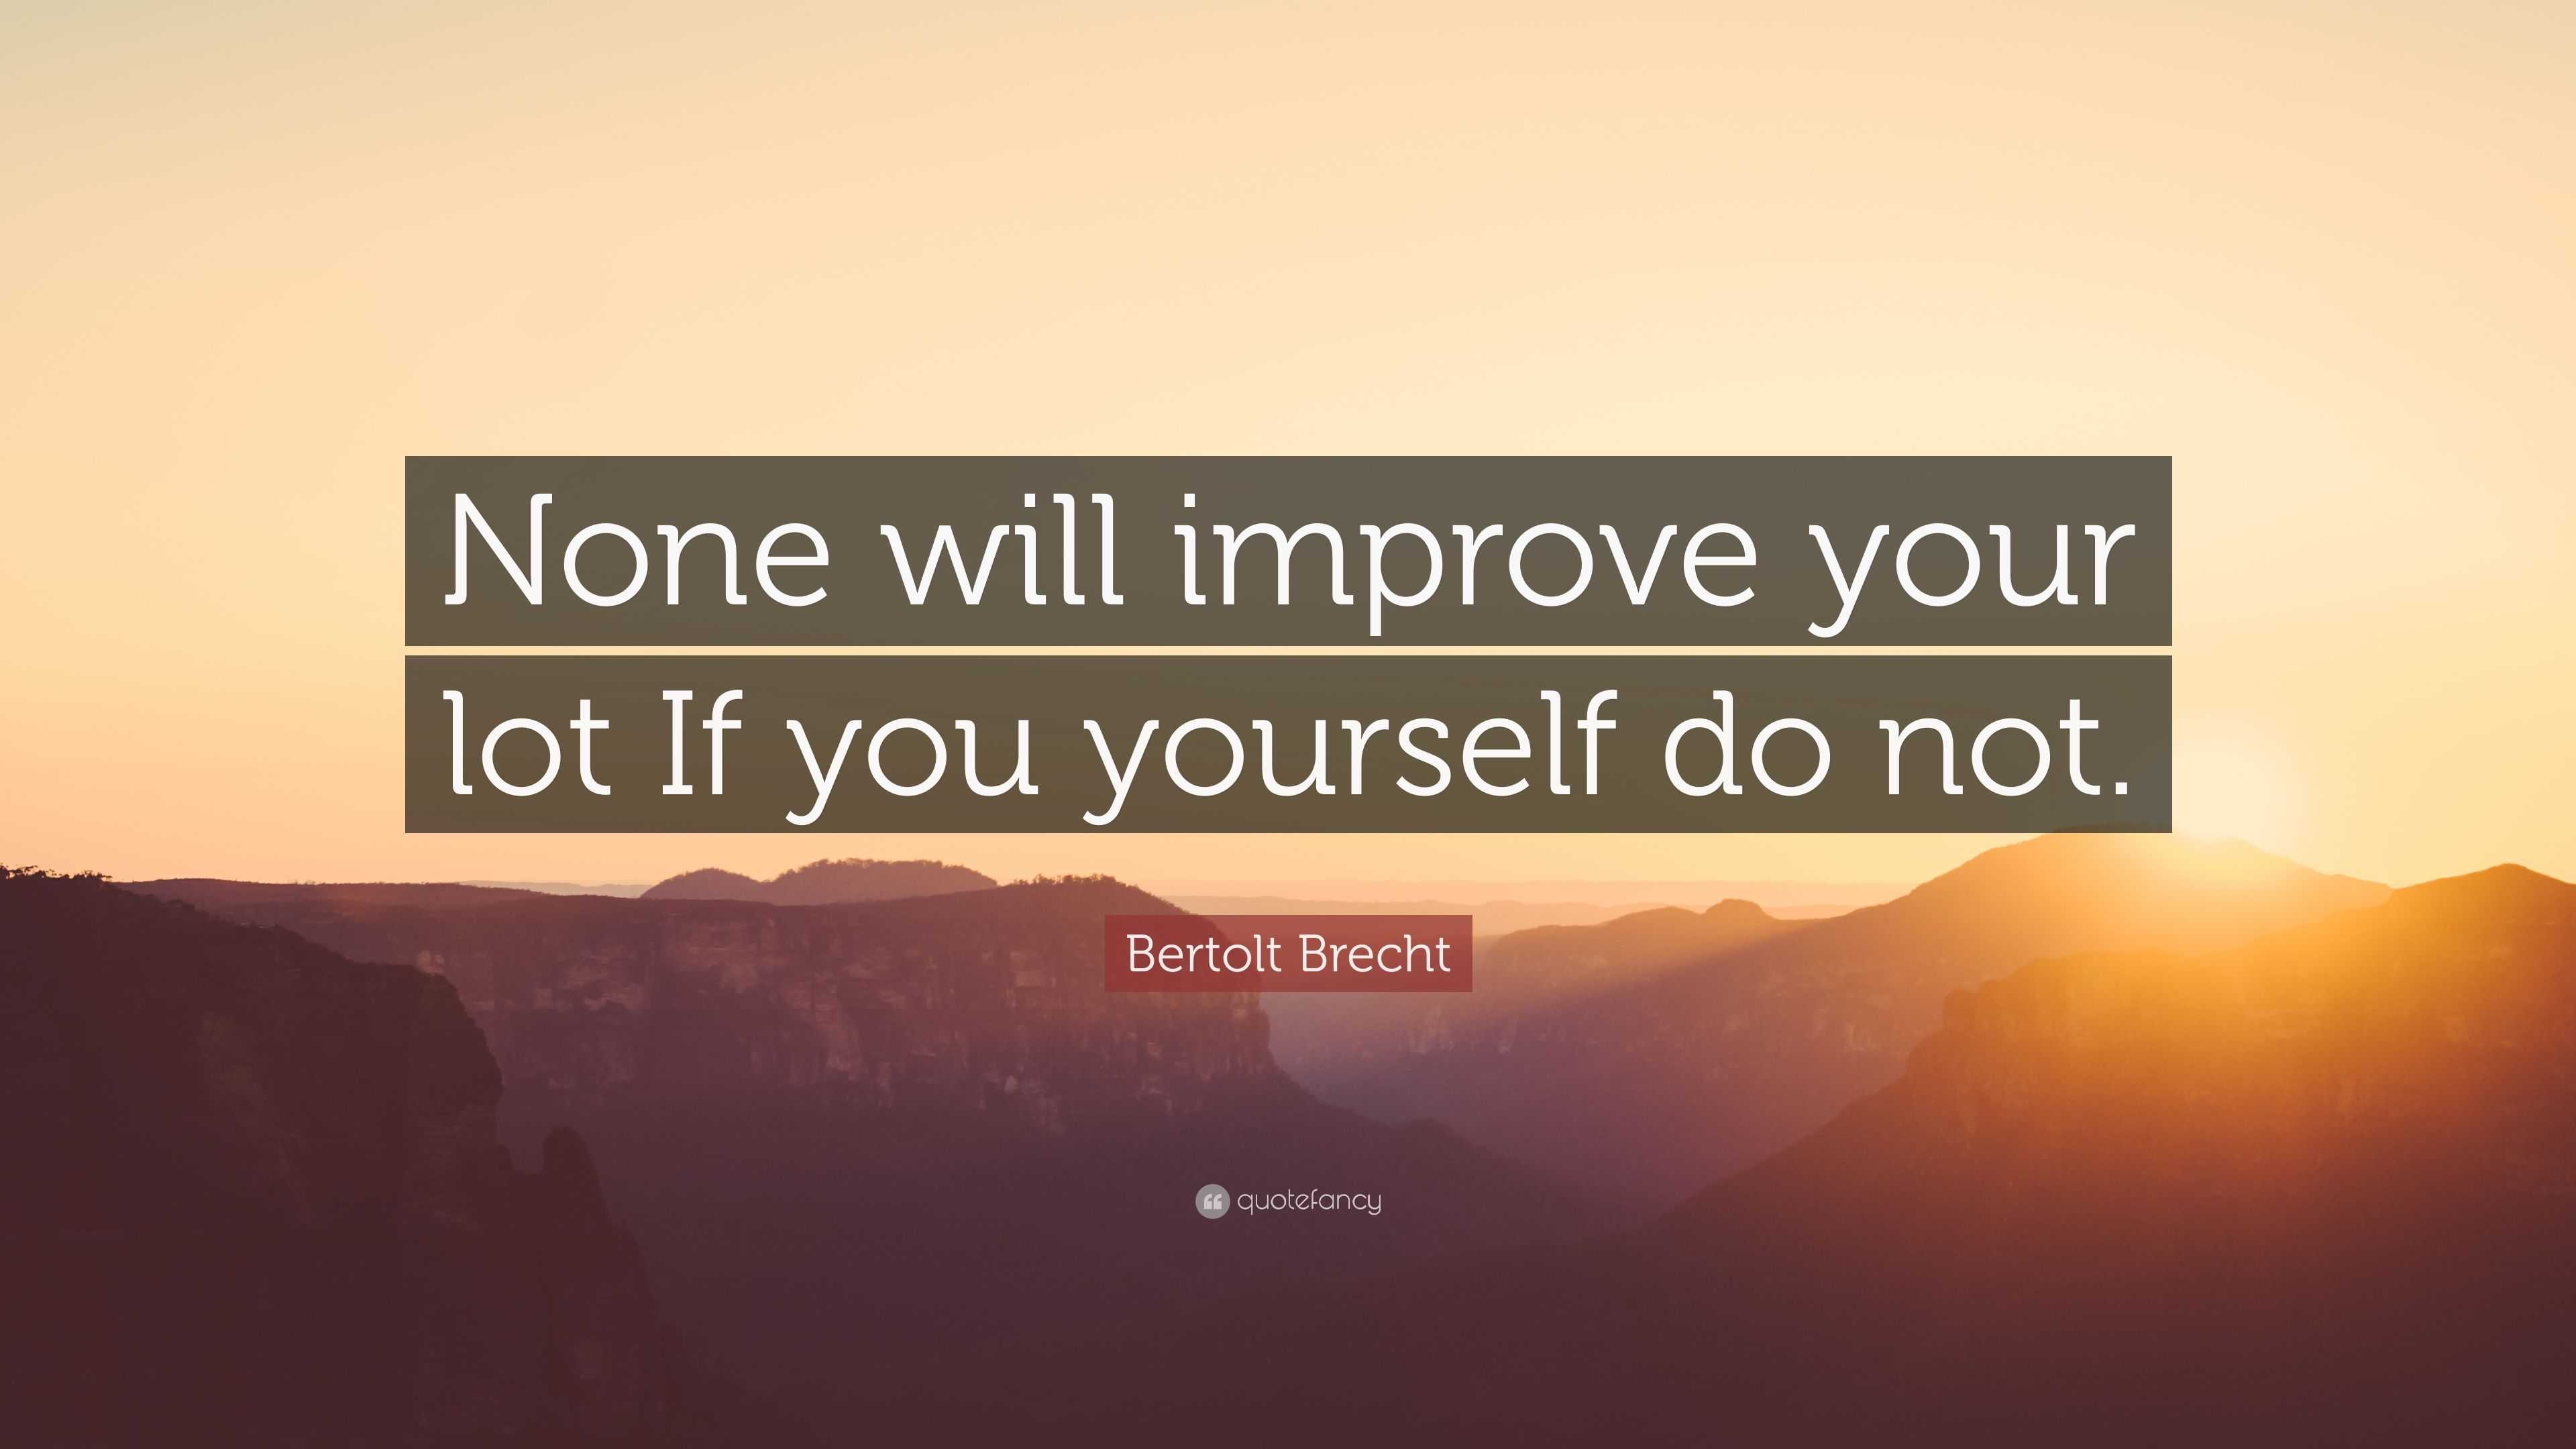 Bertolt Brecht Quote None Will Improve Your Lot If You Yourself Do Not